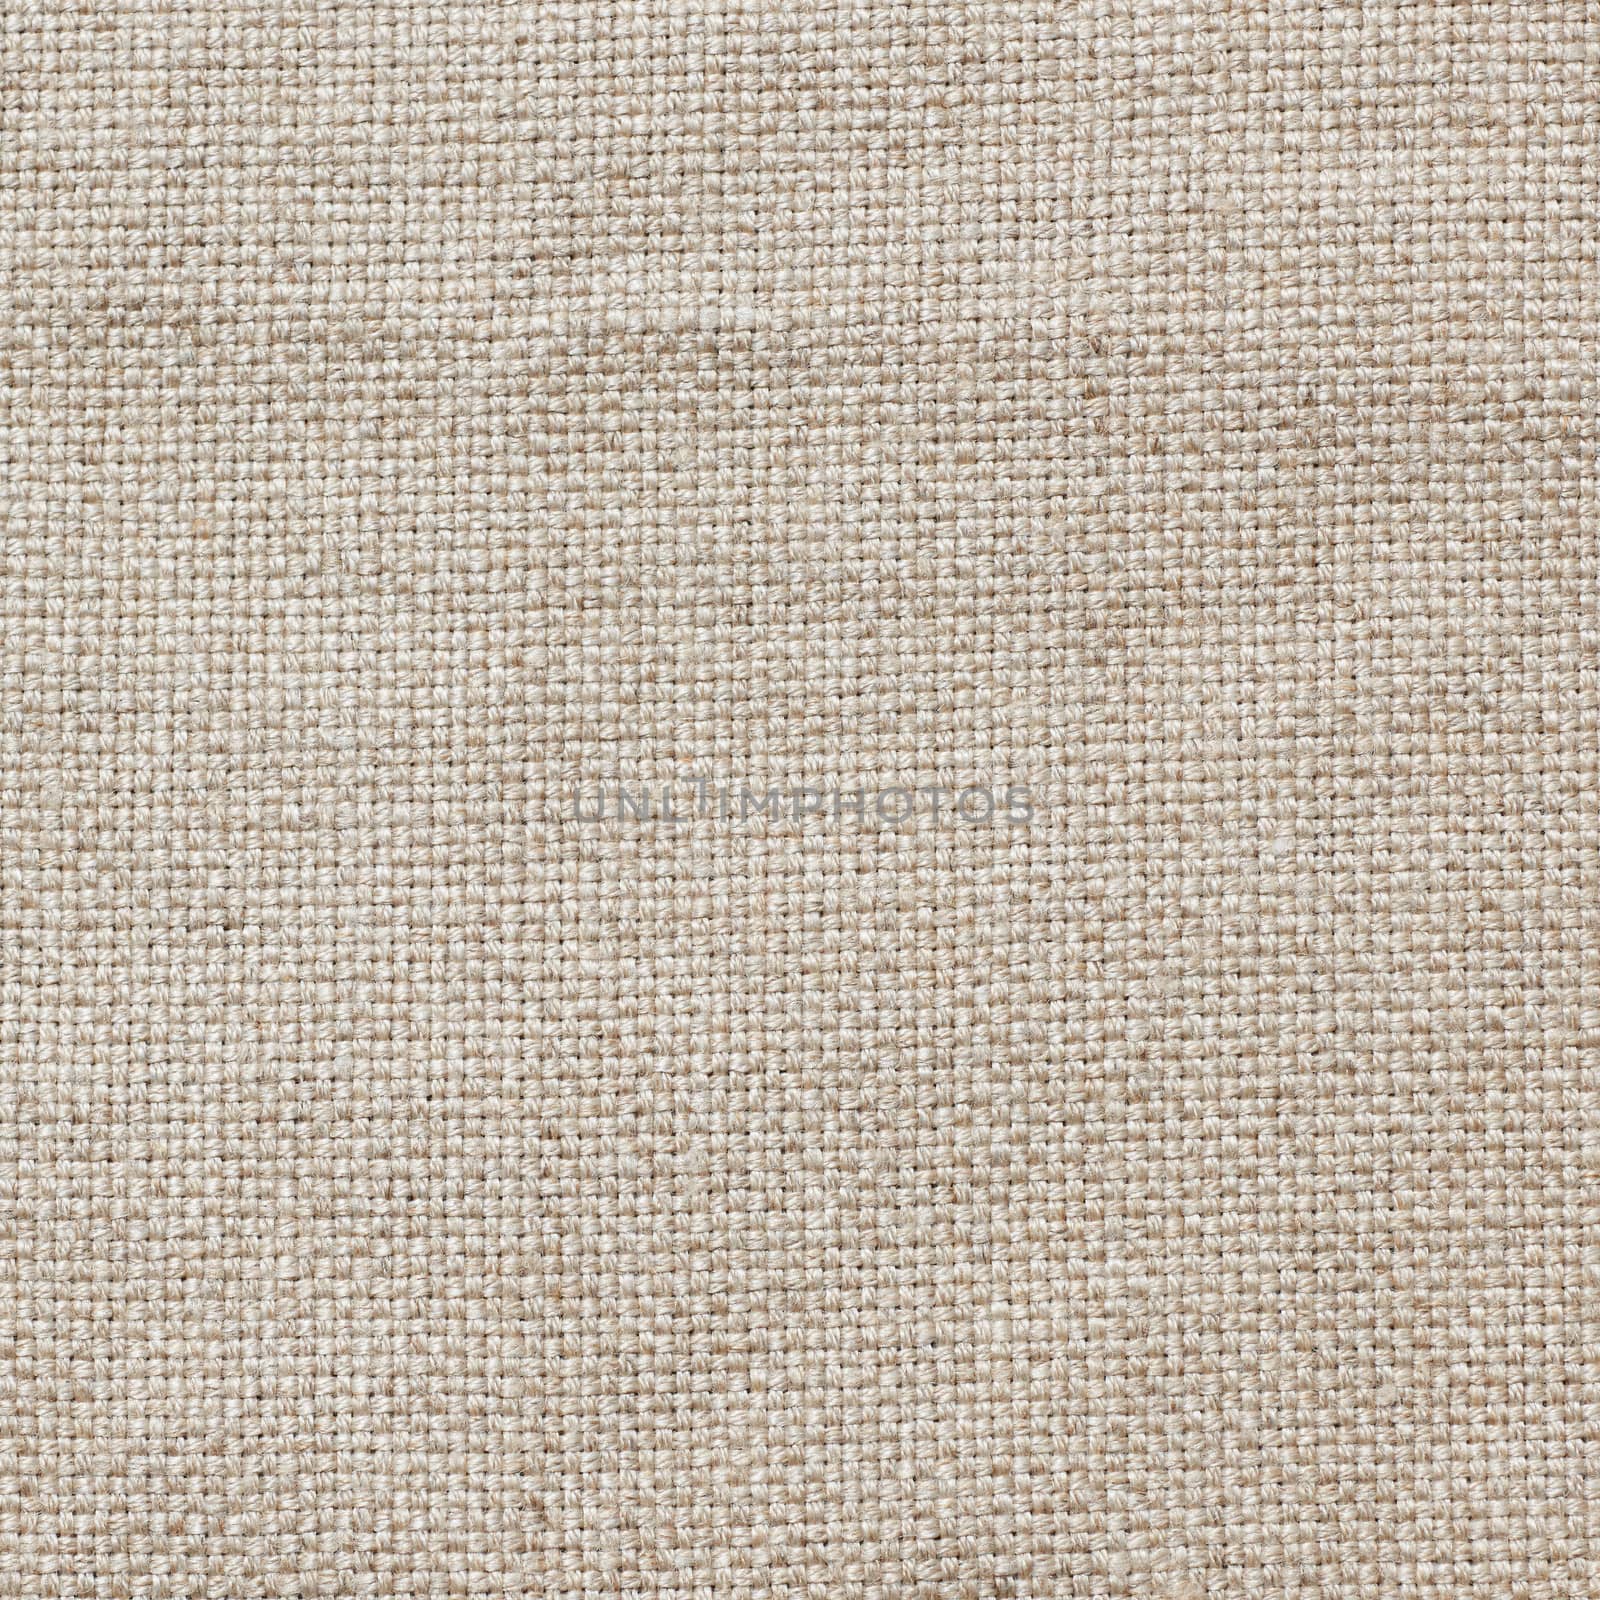 Linen canvas fabric background, real natural material